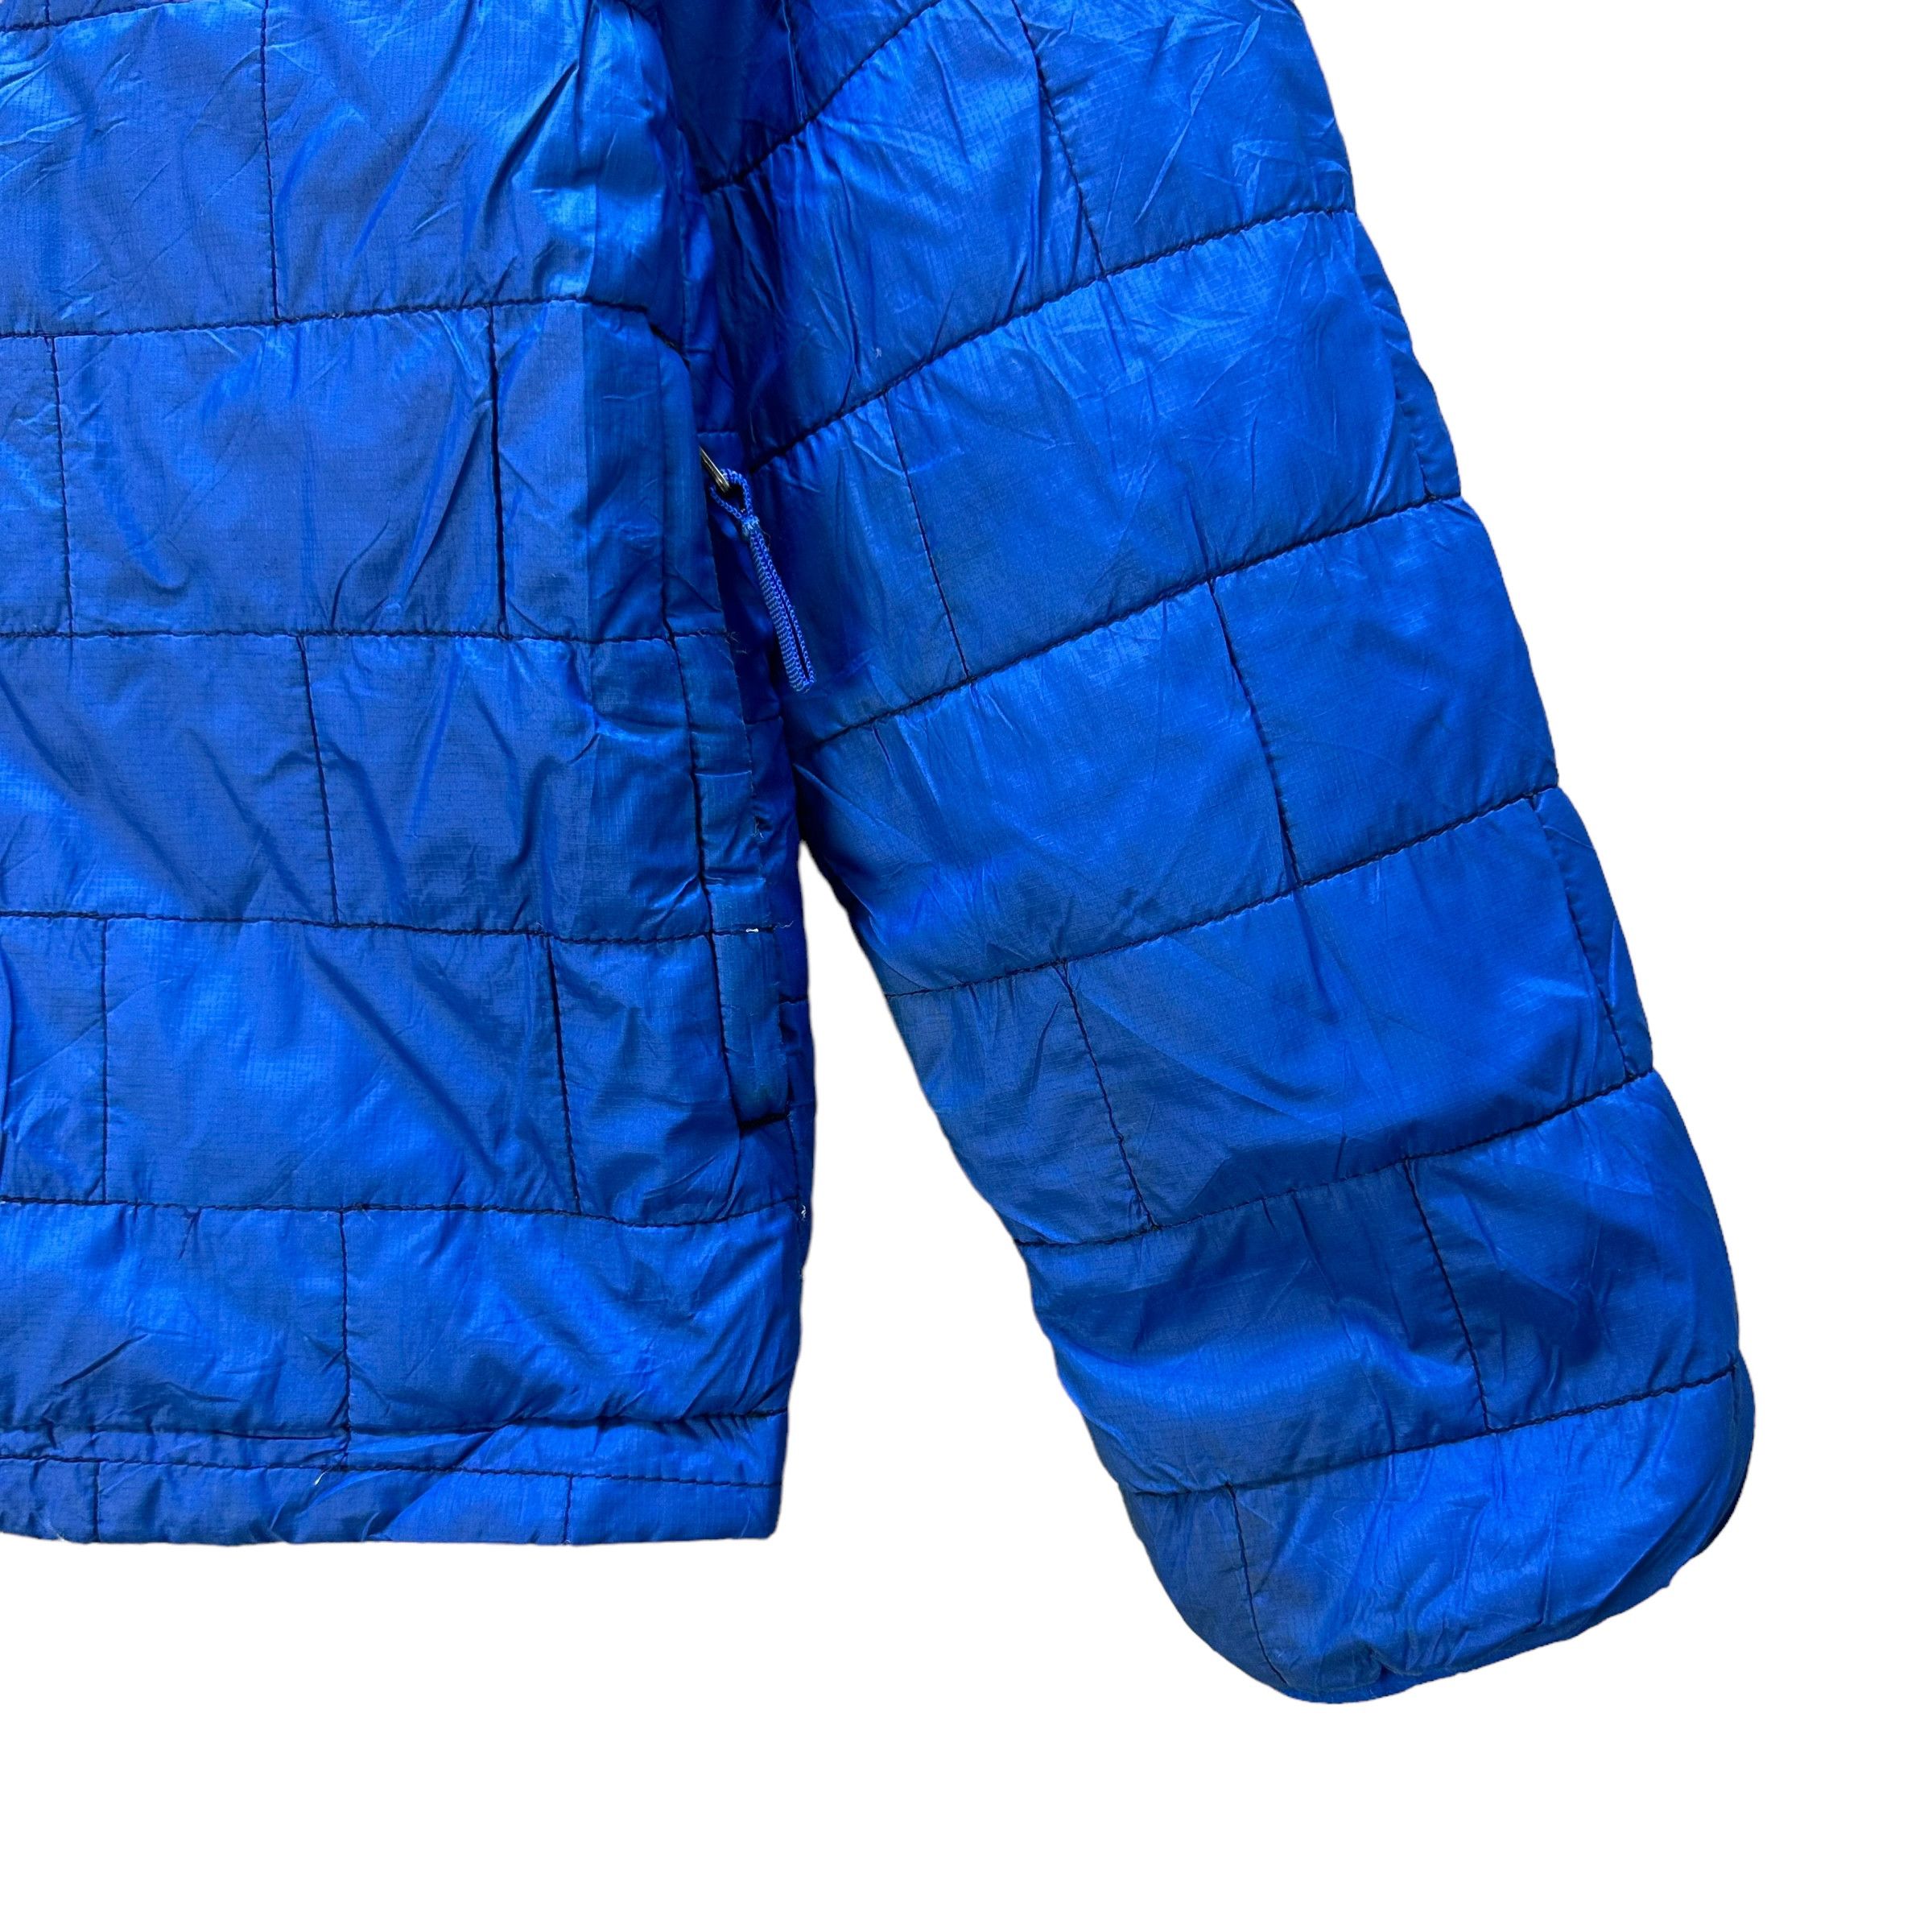 PATAGONIA LIGHT PUFFER JACKET IN BLUE FOR KIDS #9020-48 - 9